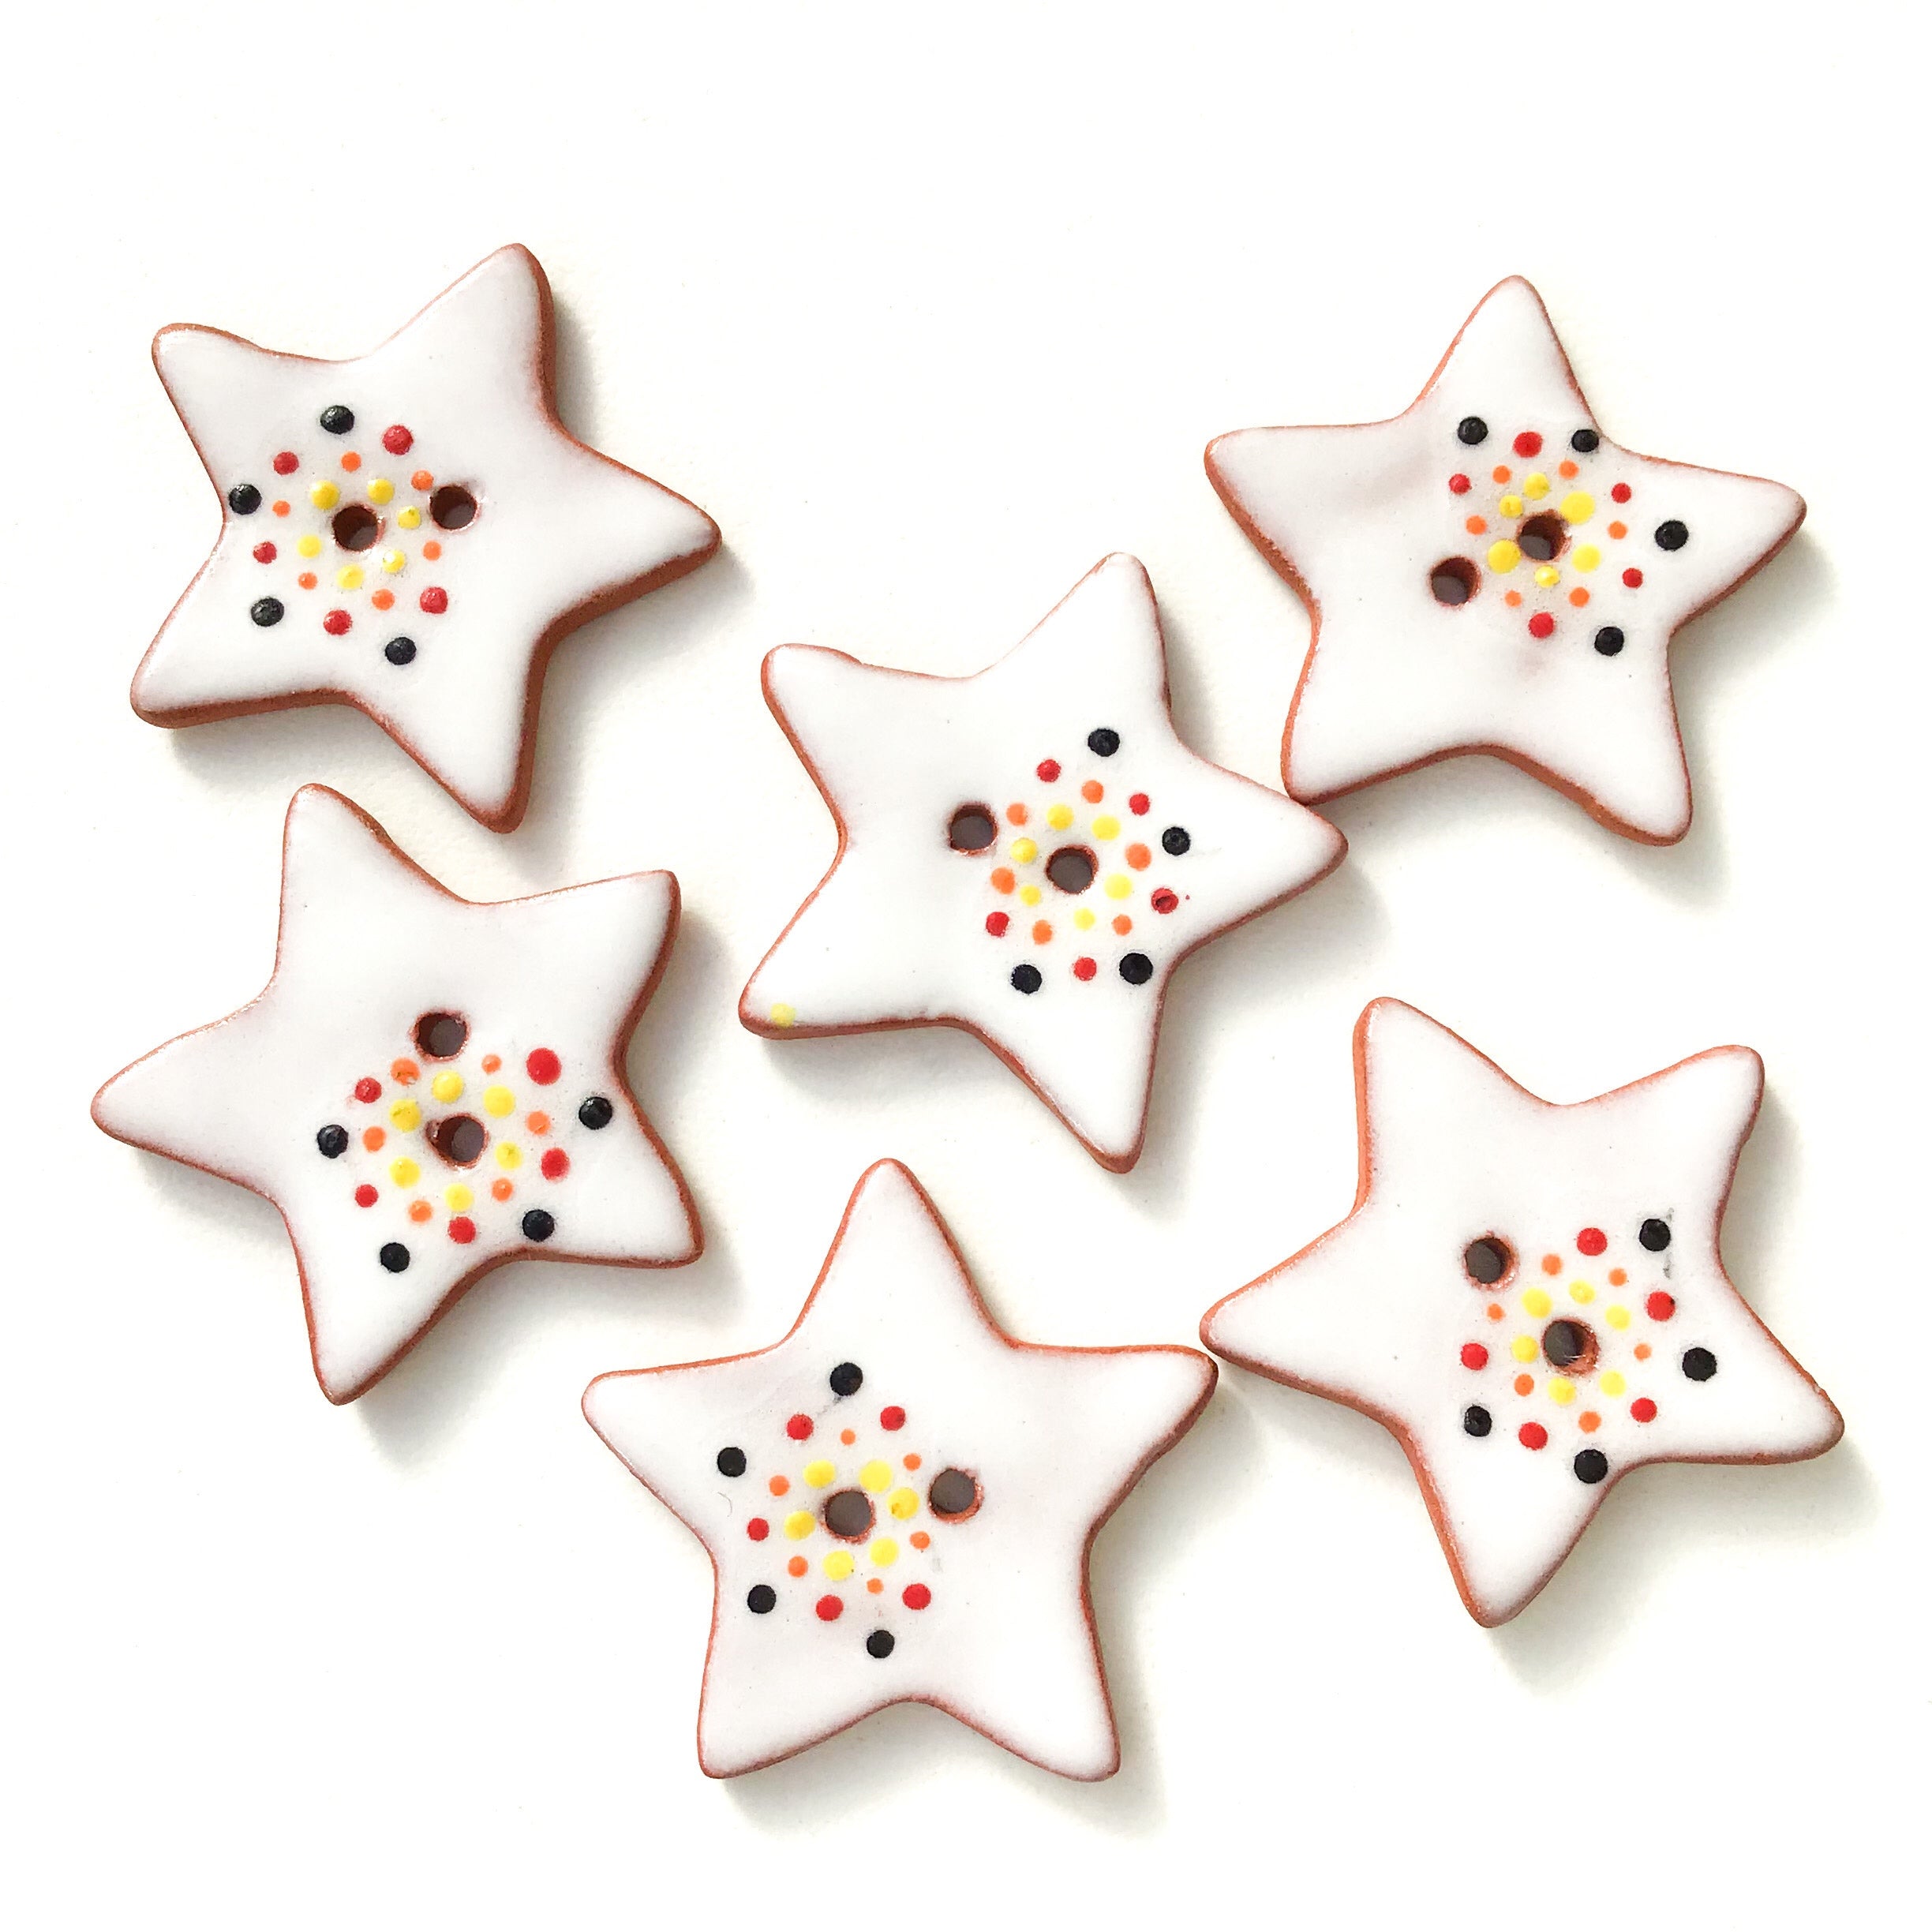 Red & Yellow Color Flare Star Buttons - Ceramic Star Buttons - 1 1